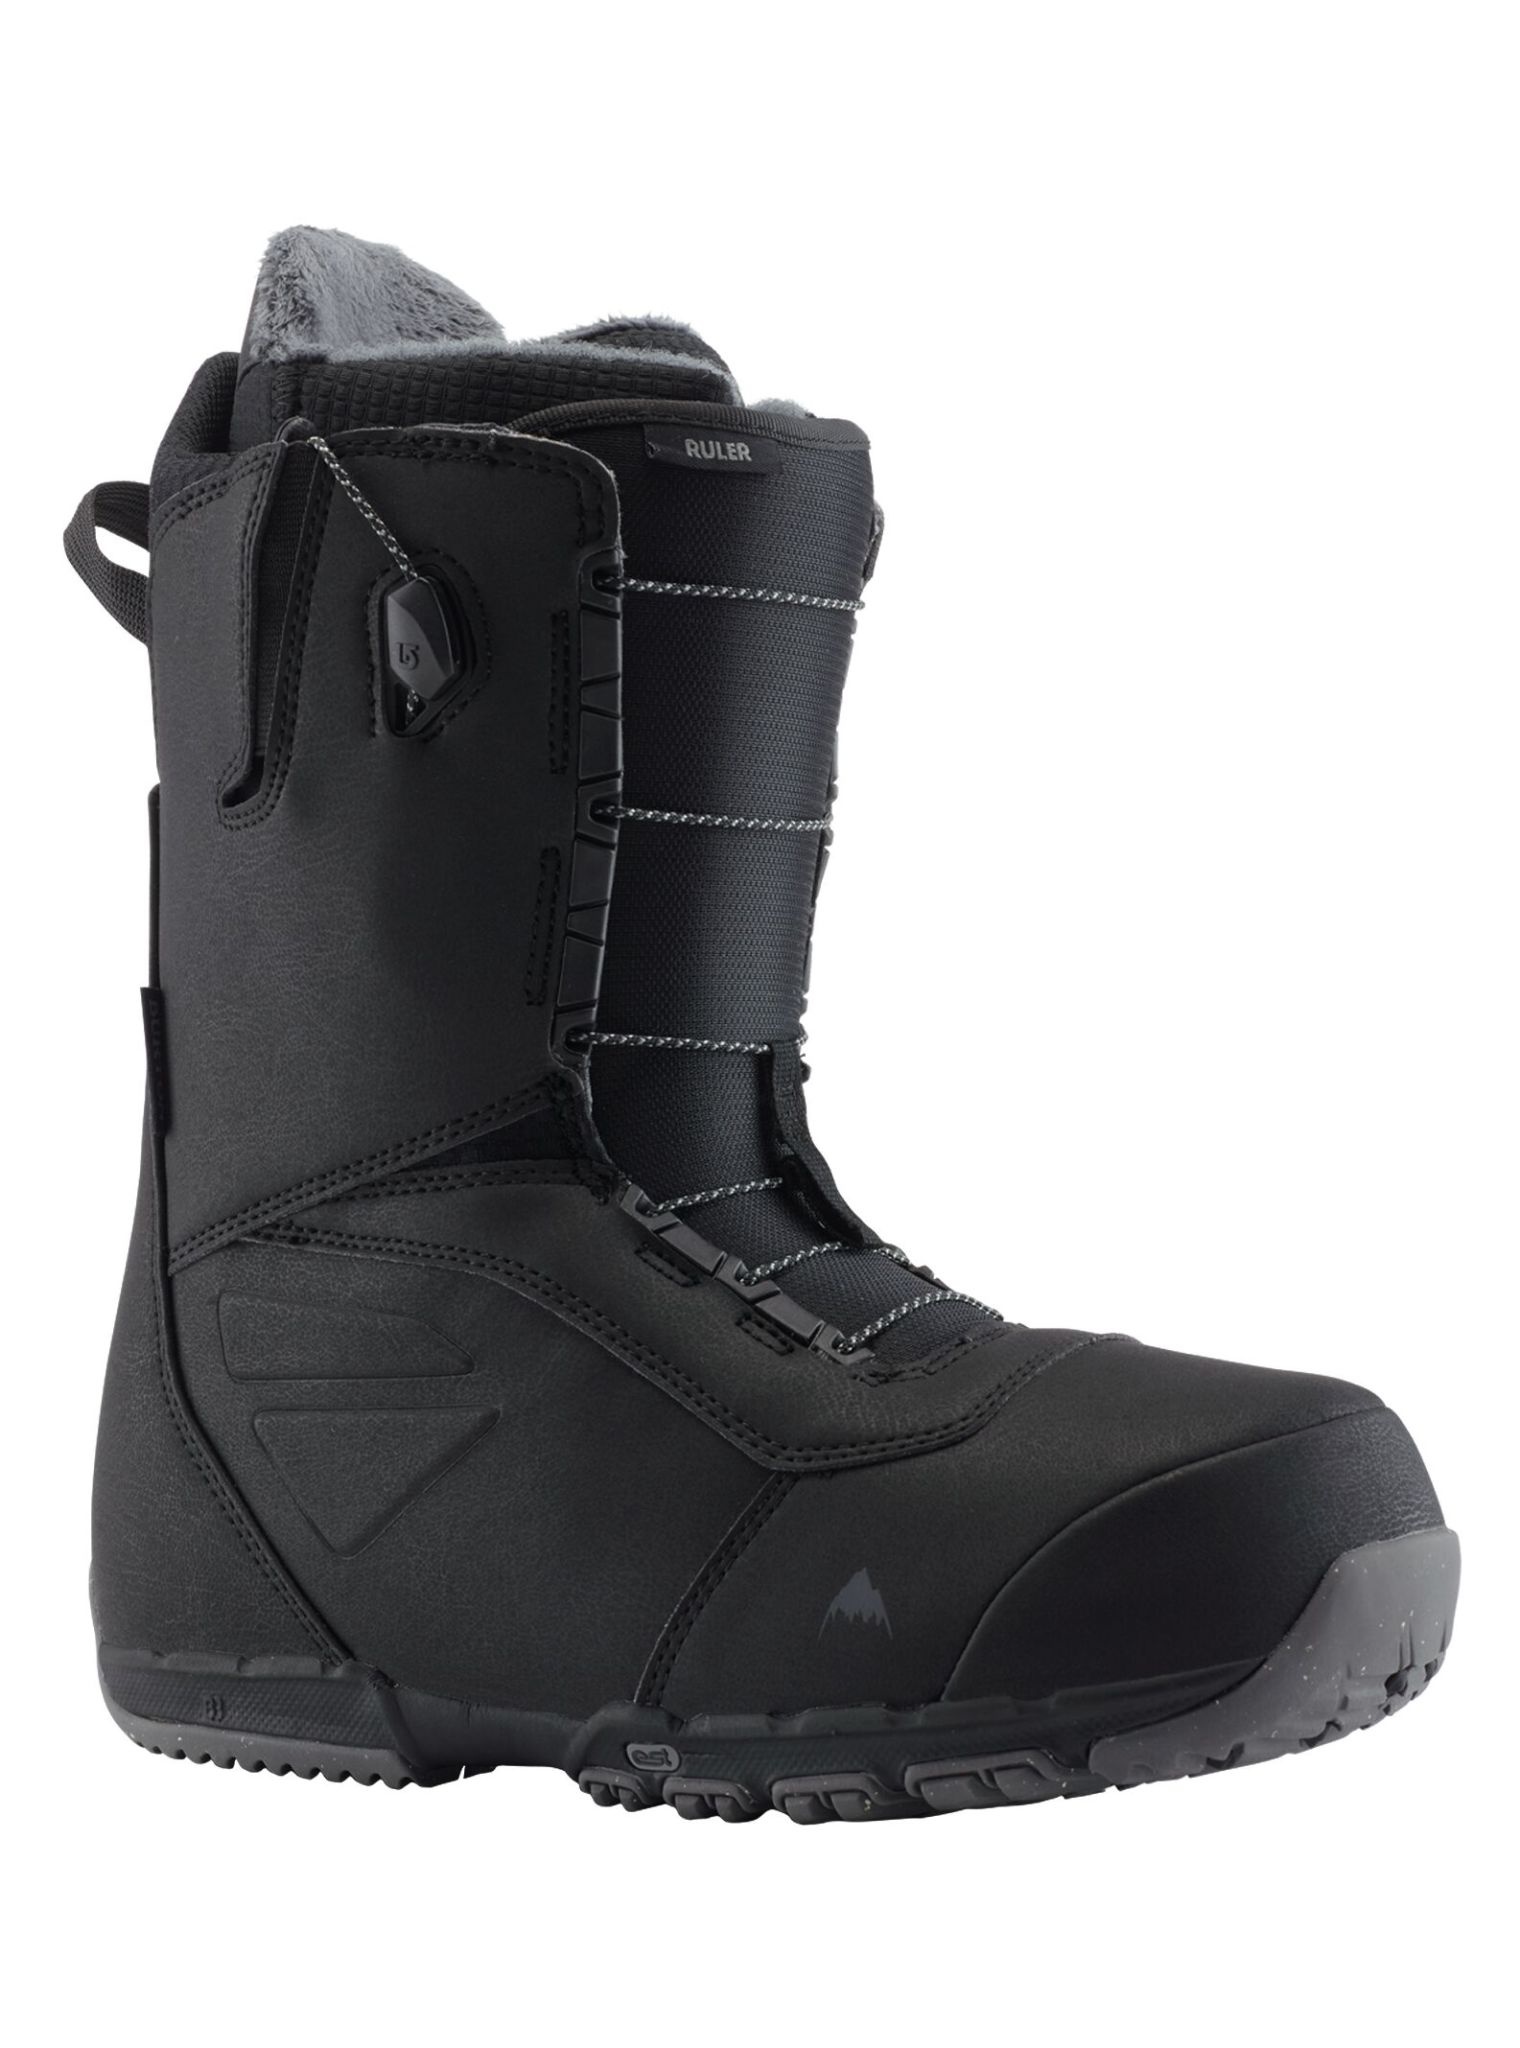 wide snowboard boot